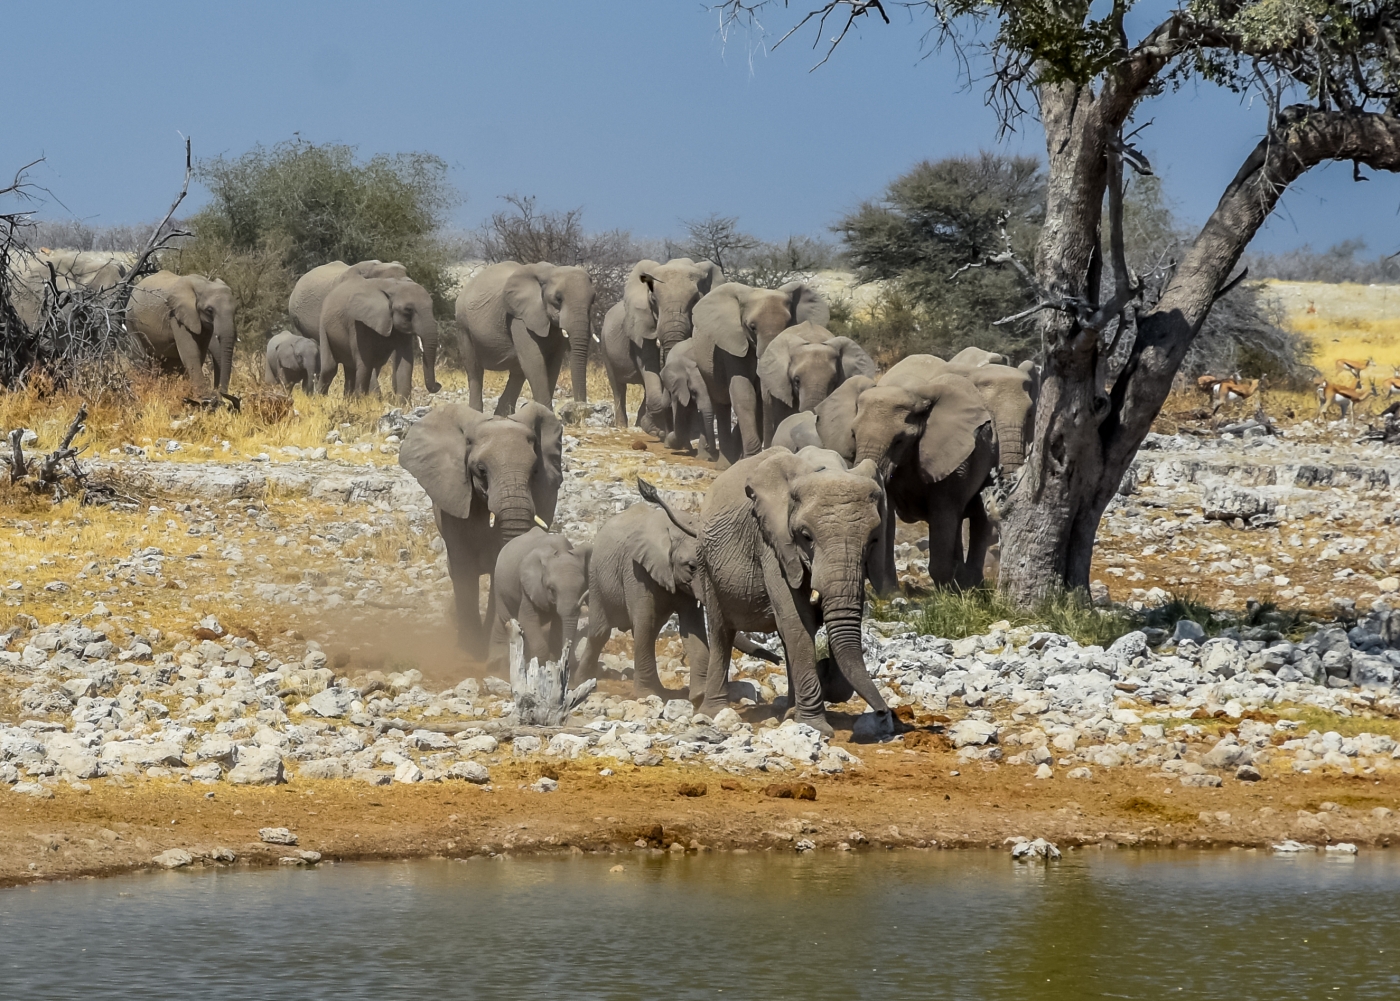 Taking over the water hole by Susan Case